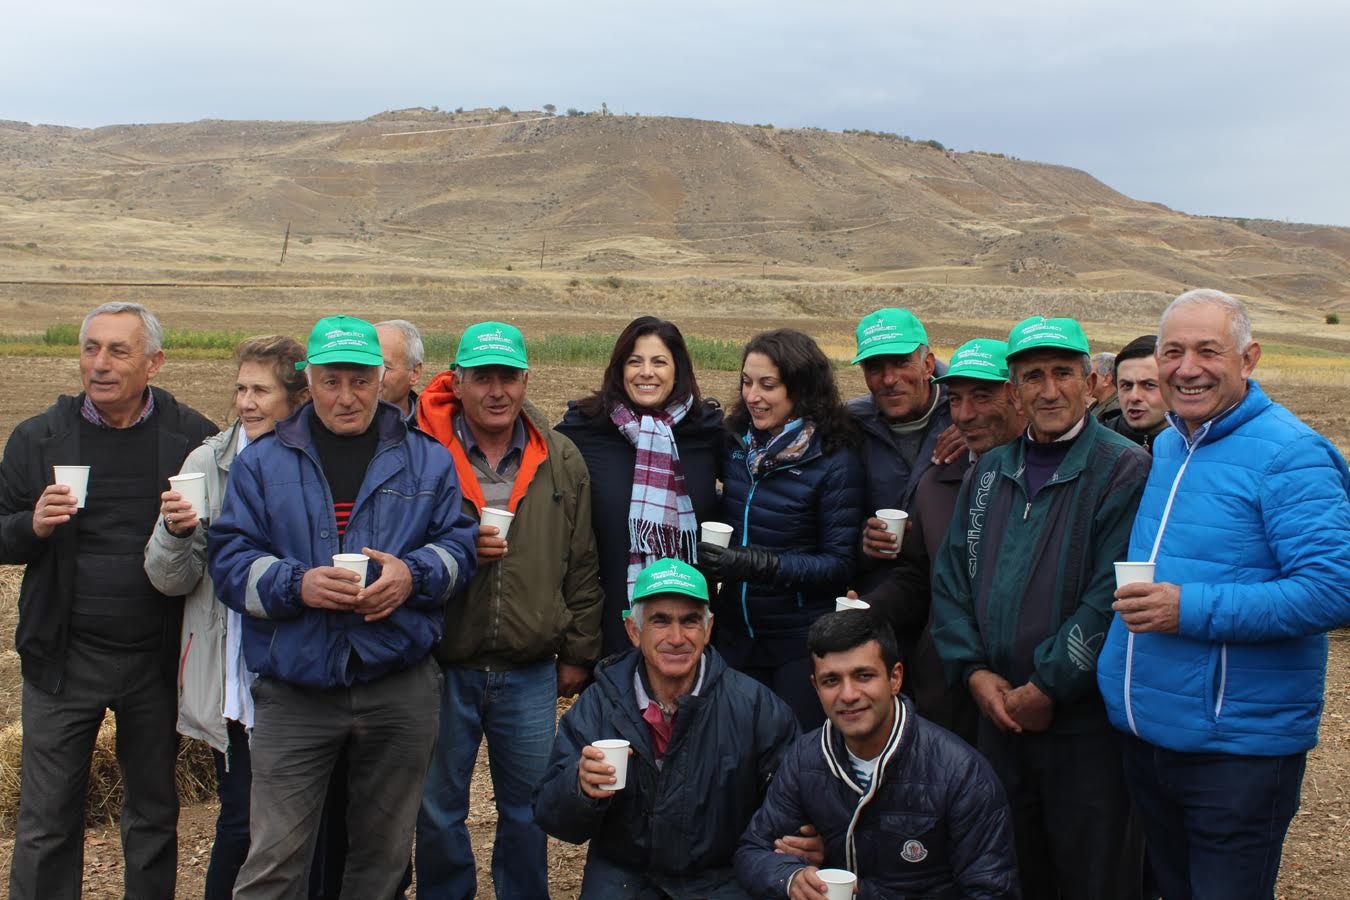 ATP’s leadership joined guests in the southern wine region of Vayots Dzor to break ground on its fourth tree nursery; several Chiva Nursery workers are pictured with founder Carolyn Mugar, executive committee member Julia Mirak Kew, executive director Jeanmarie Papelian, and nursery managers Samvel Ghandilyan and Tigran Palazyan